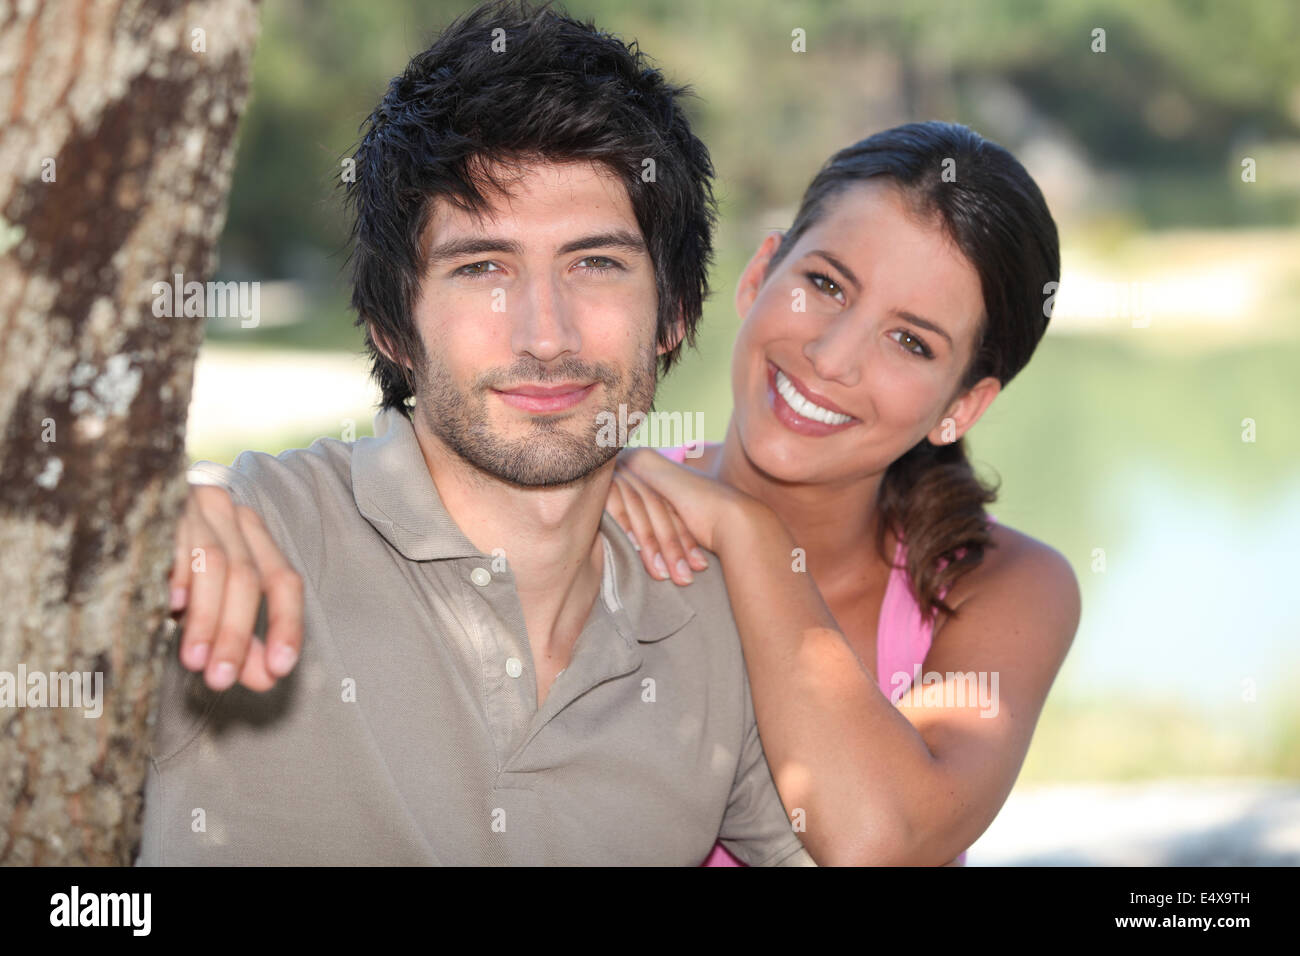 Couple enjoying a beautiful day out together Stock Photo